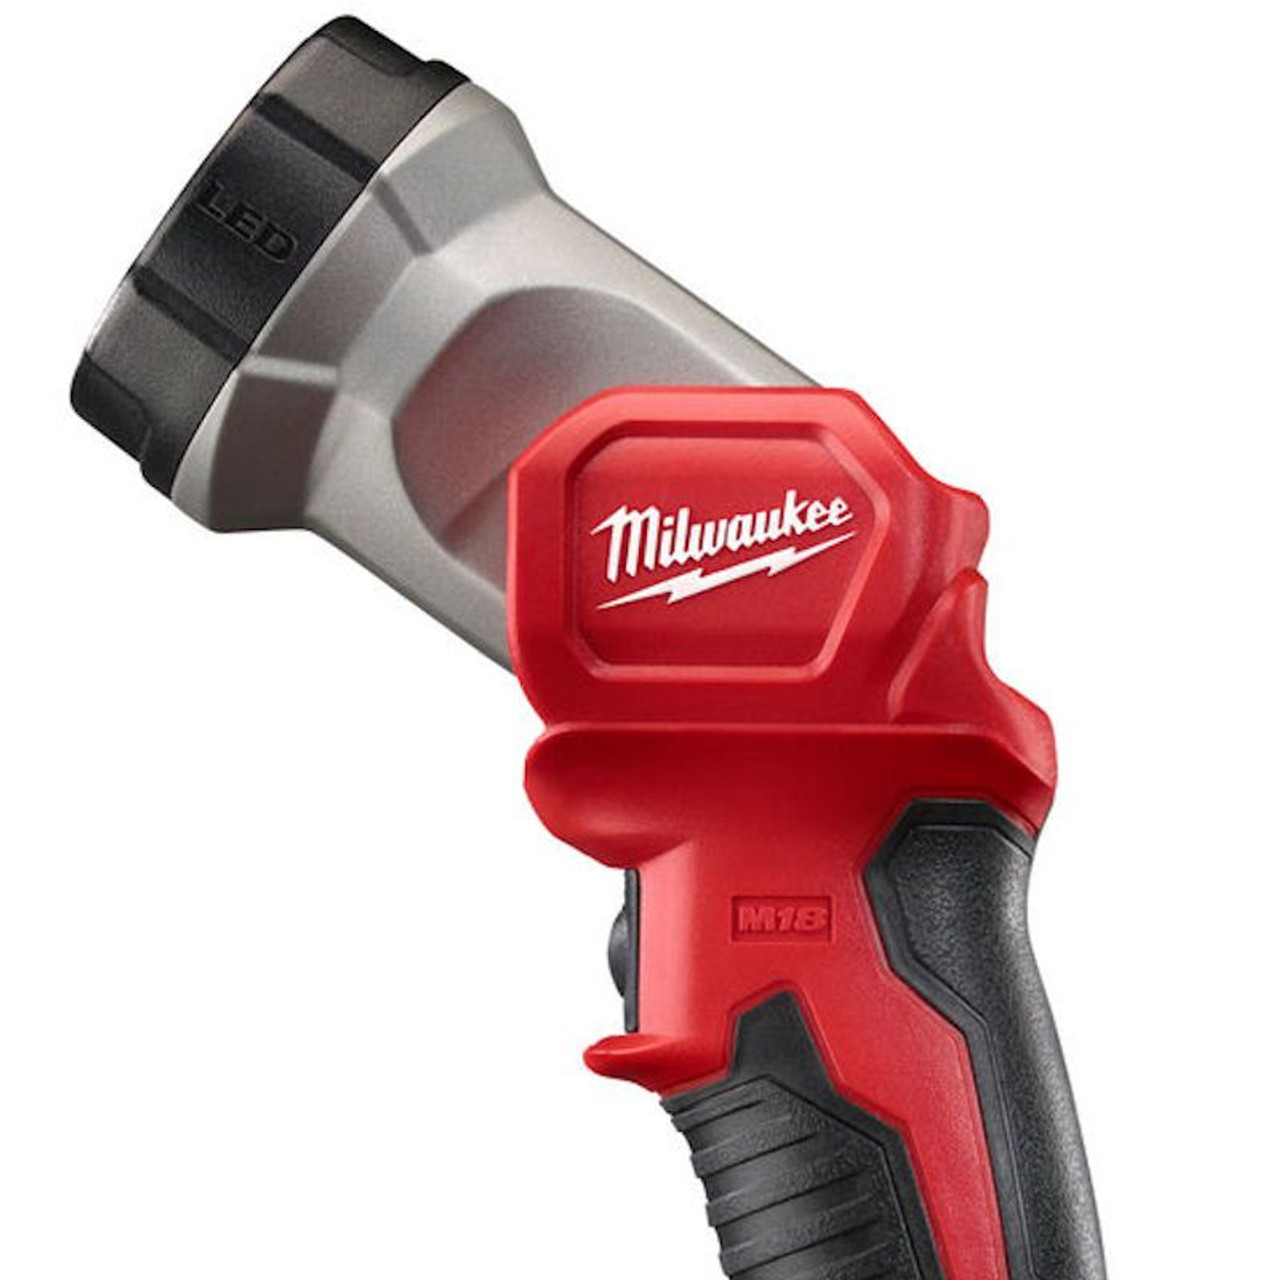 MILWAUKEE M18 18V LED TORCH WORK LIGHT (BODY ONLY) M18TLED-0 ToolForce